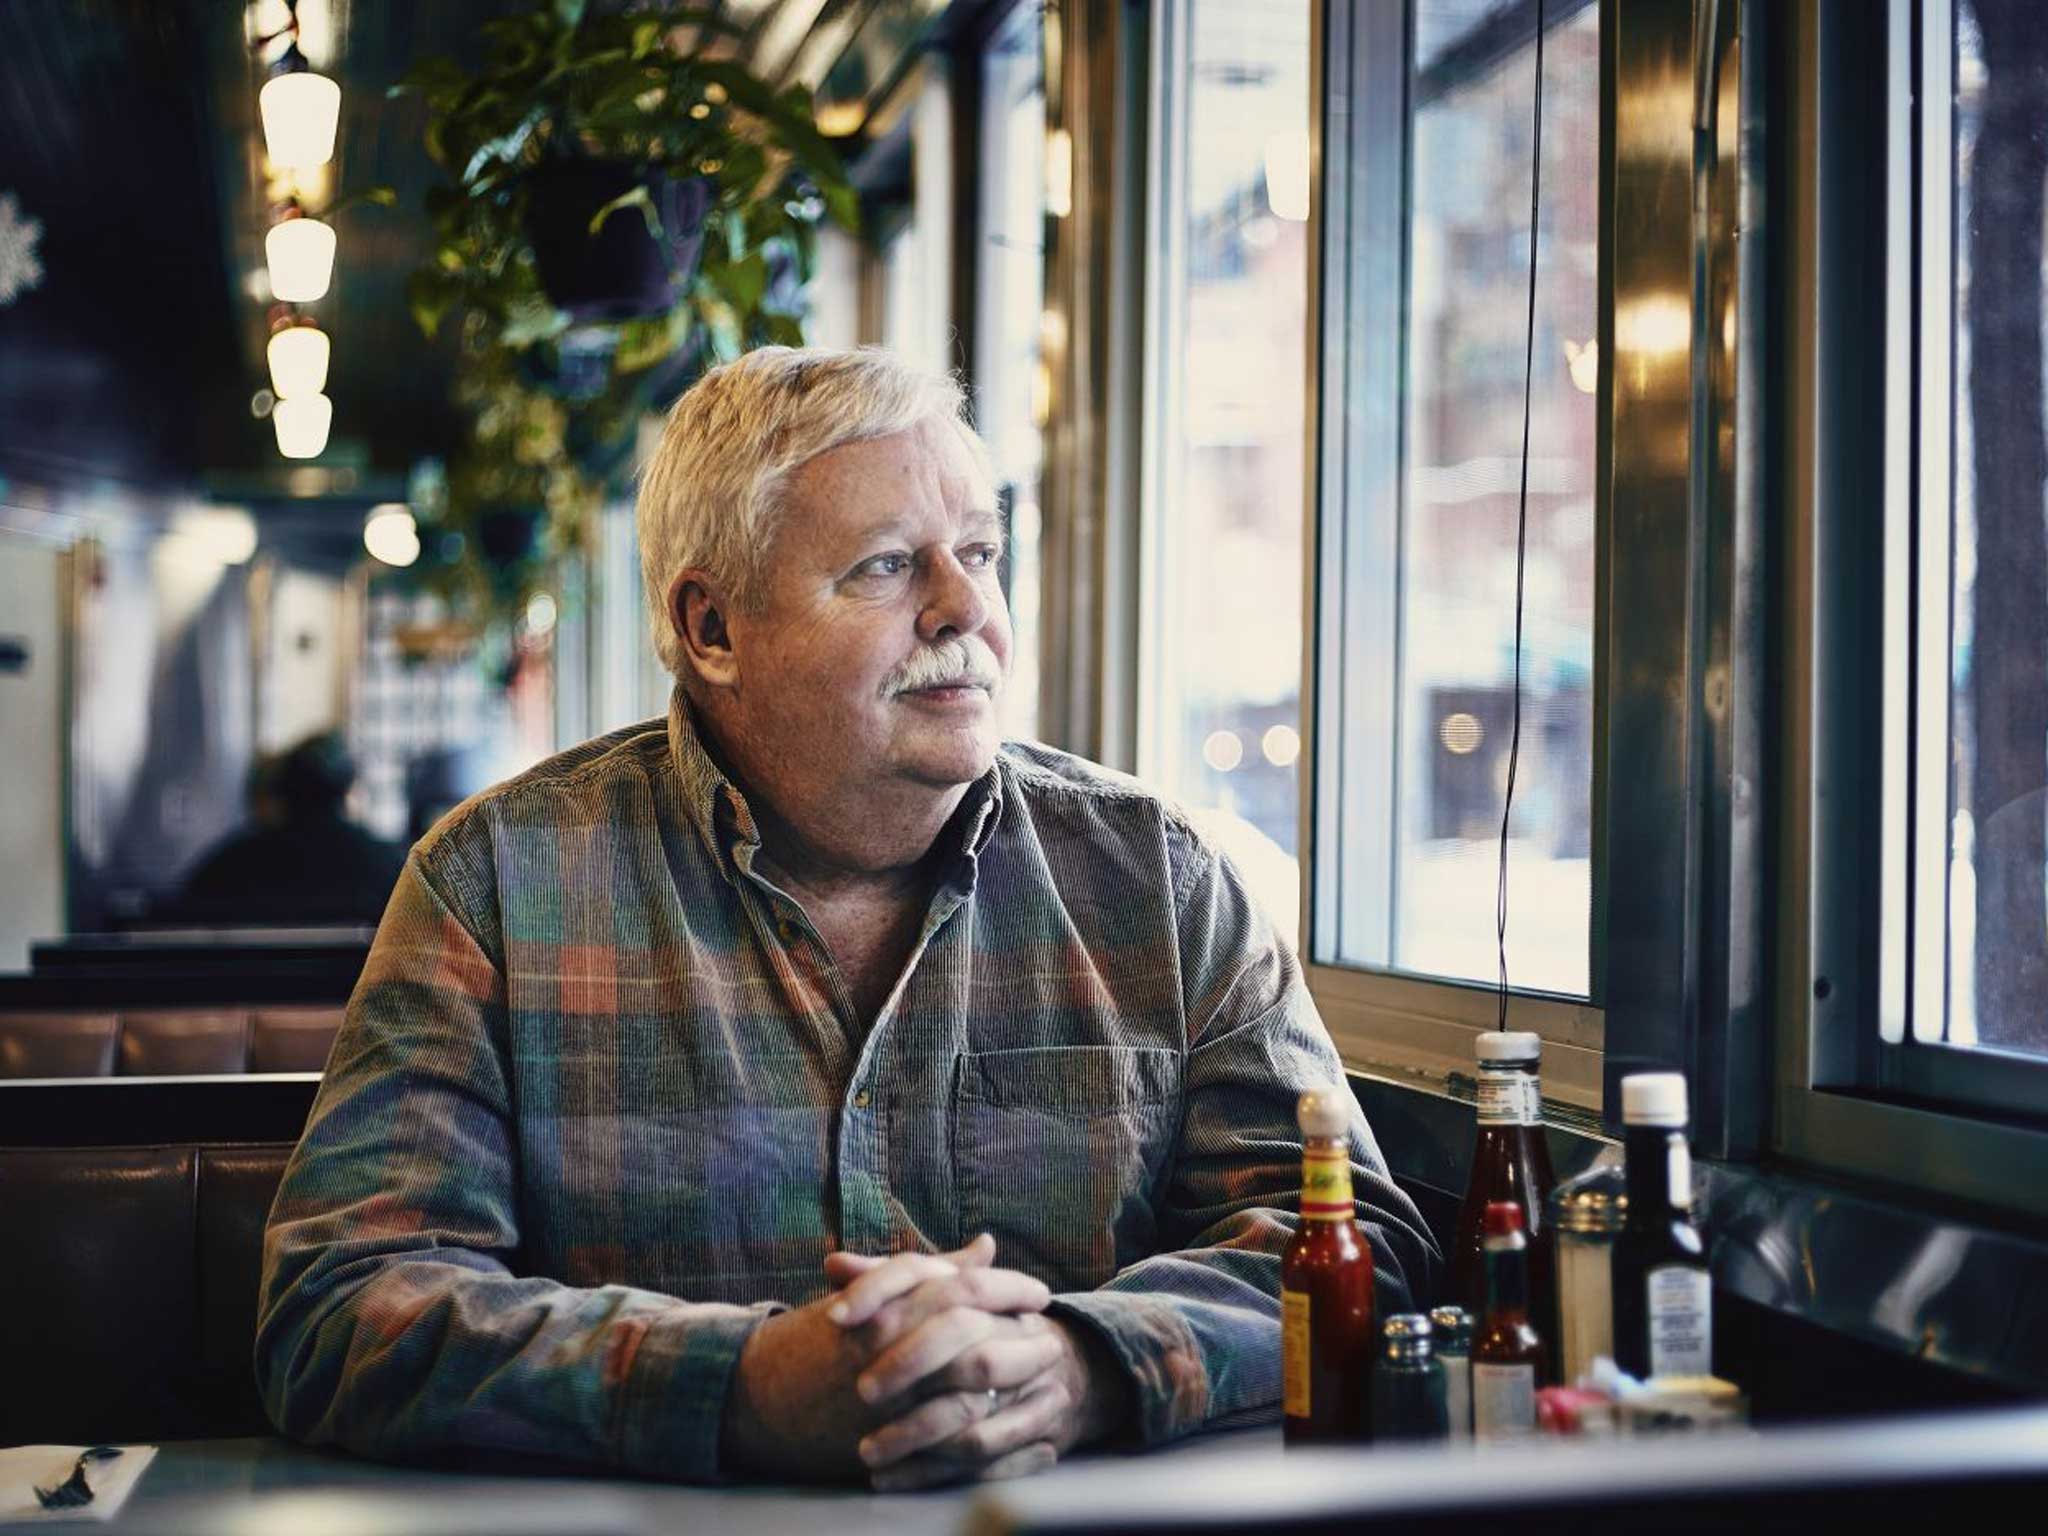 Proud tales to tell: Armistead Maupin is proud that his books helped give gay people some comfort. ‘When I started,’ he says, ‘my nature was both a crime and a mental disease, officially’